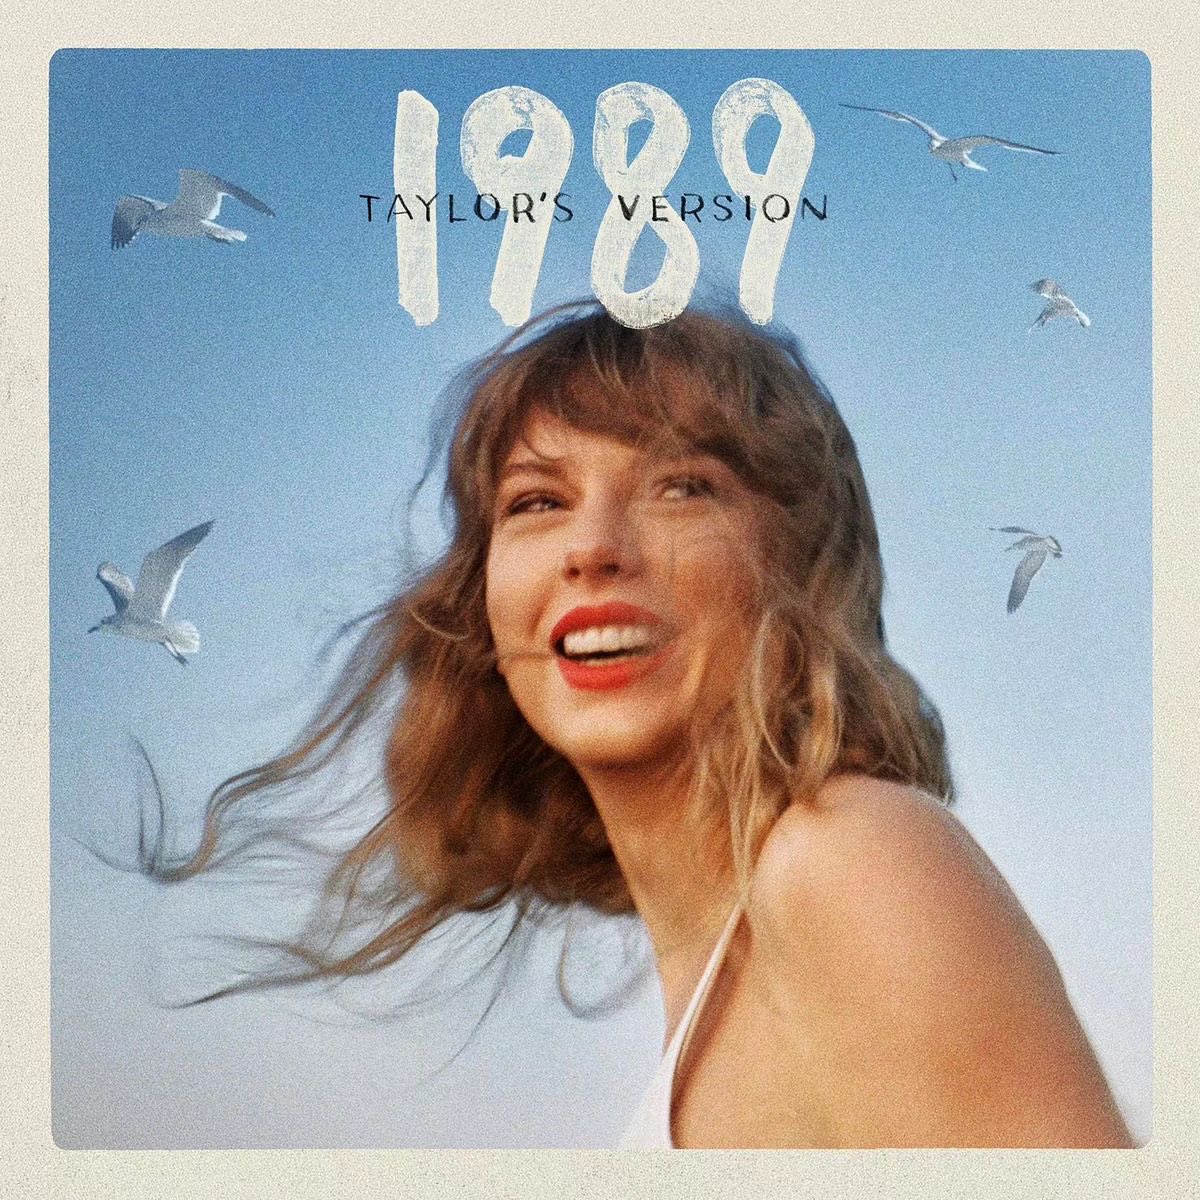 i hold a special connection to 1989 tv and this cover makes me wanna sob everytime i see it like 😭😭😭😭